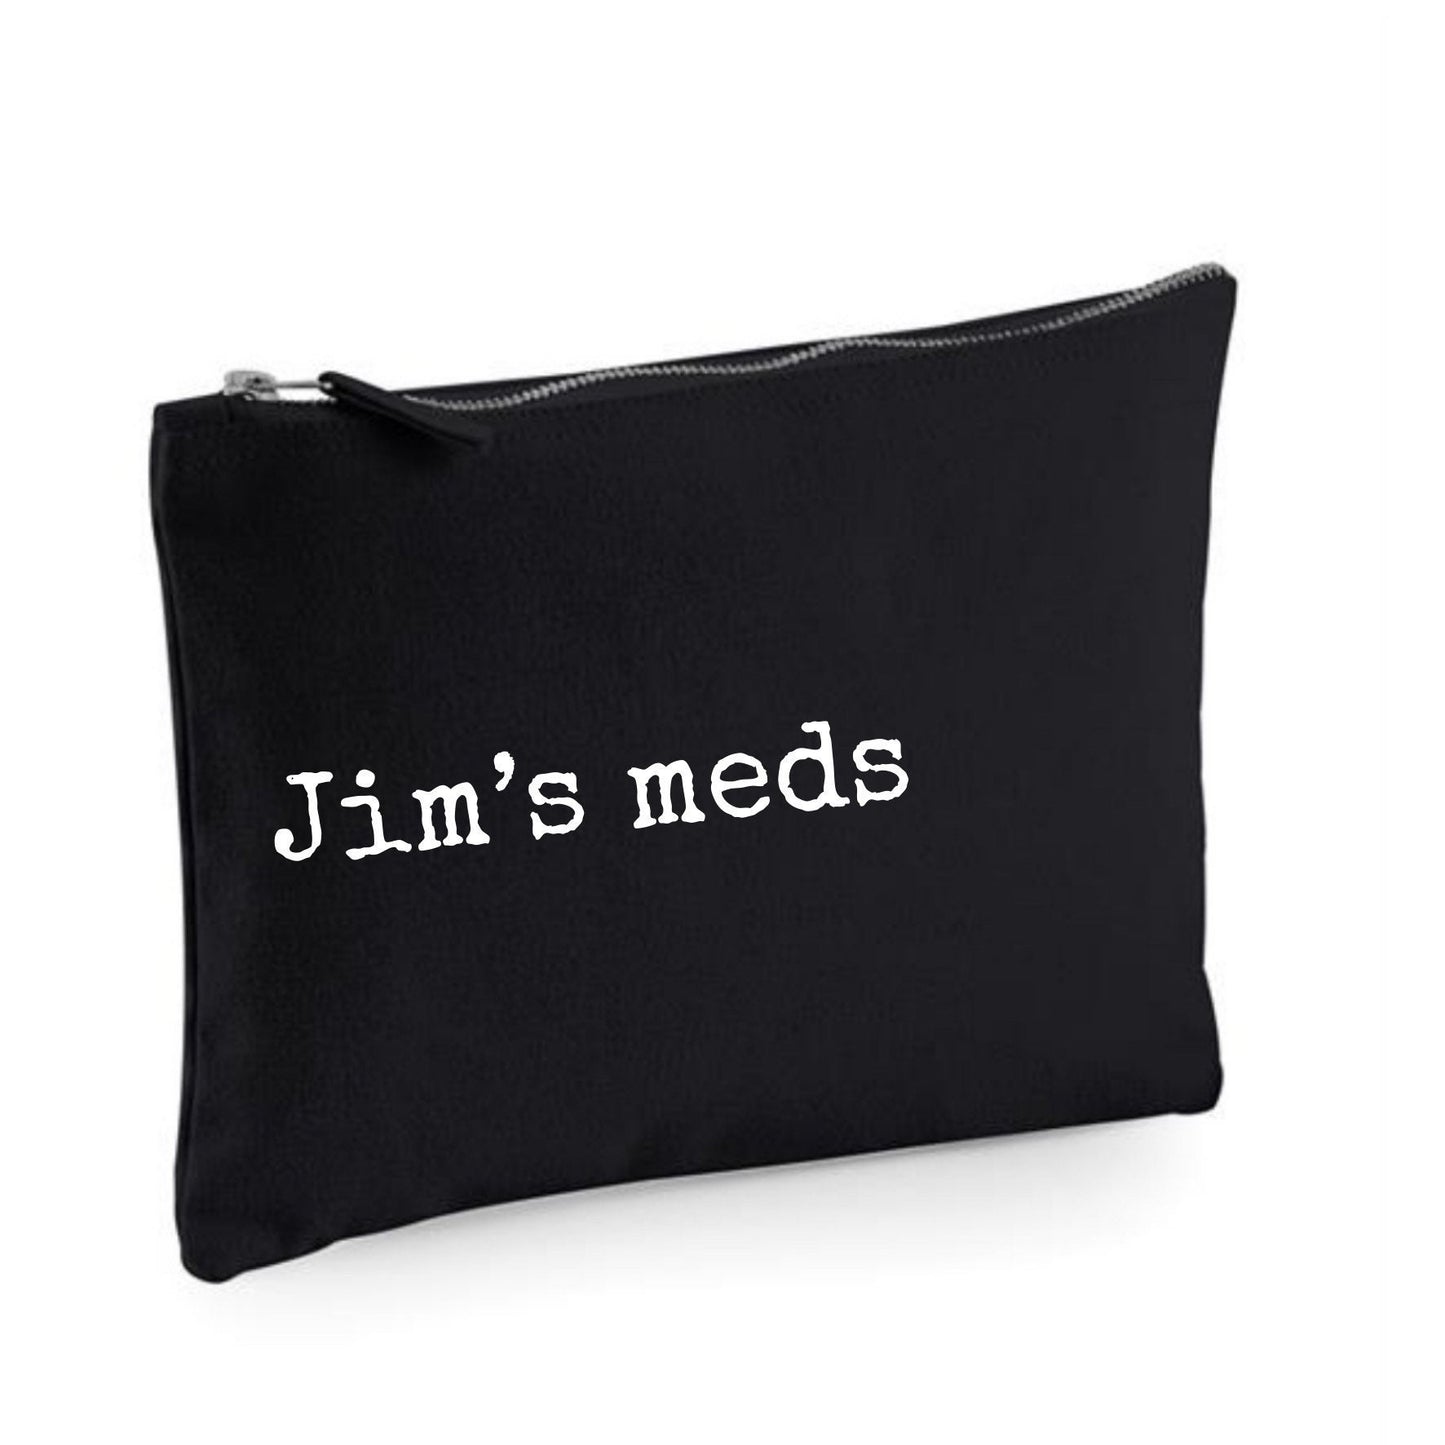 Personalised medicines case, insulin case, daily medications bag for travel, holiday case for medicines.